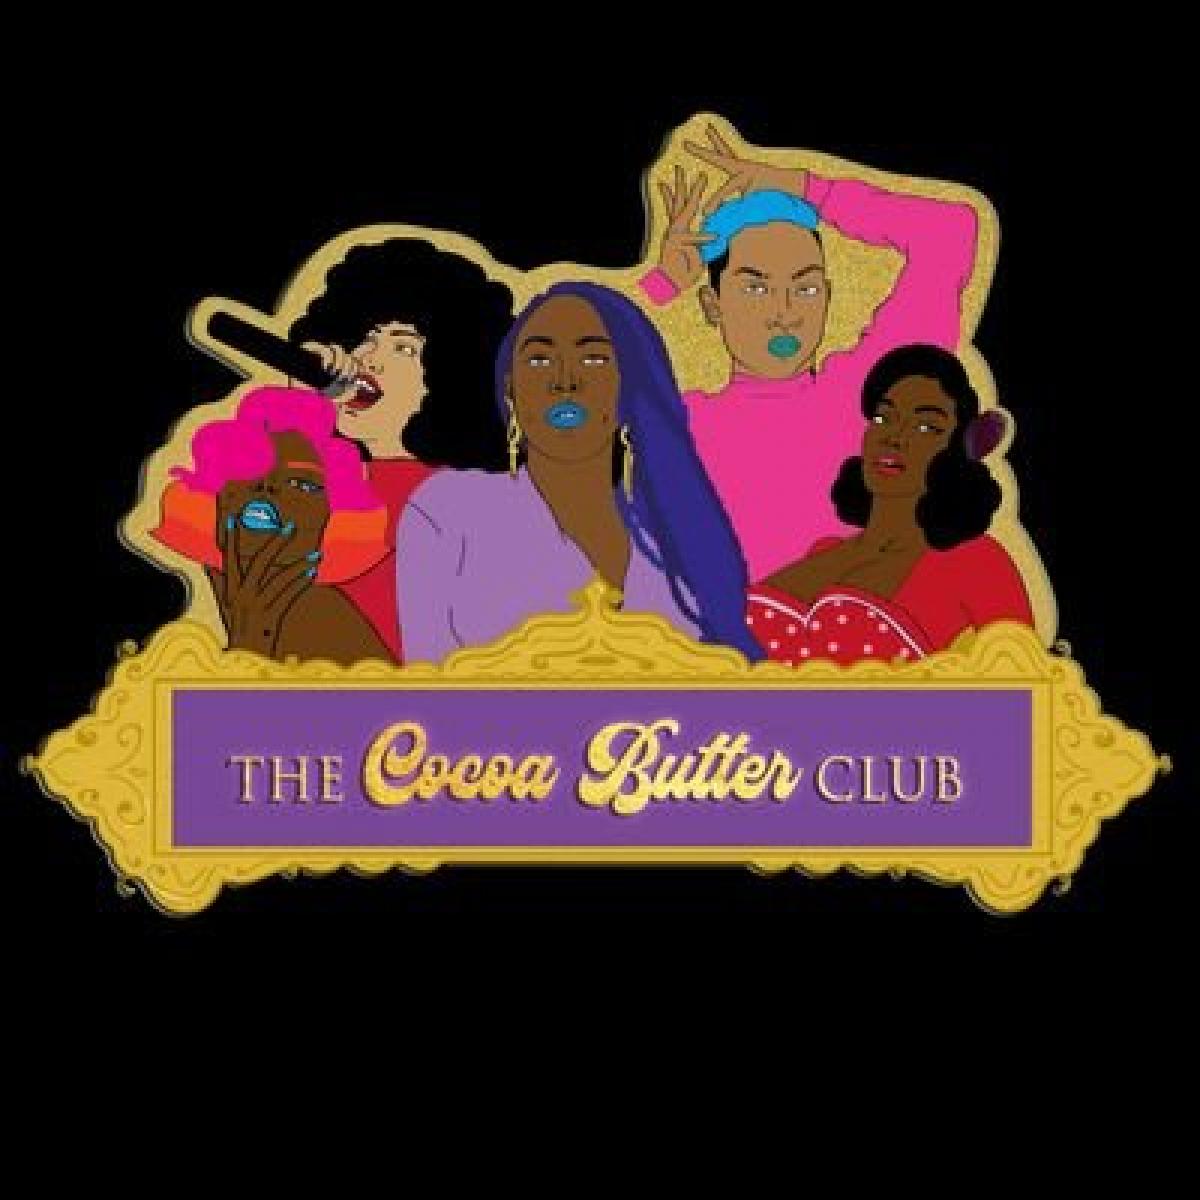  The Cocoa Butter Club